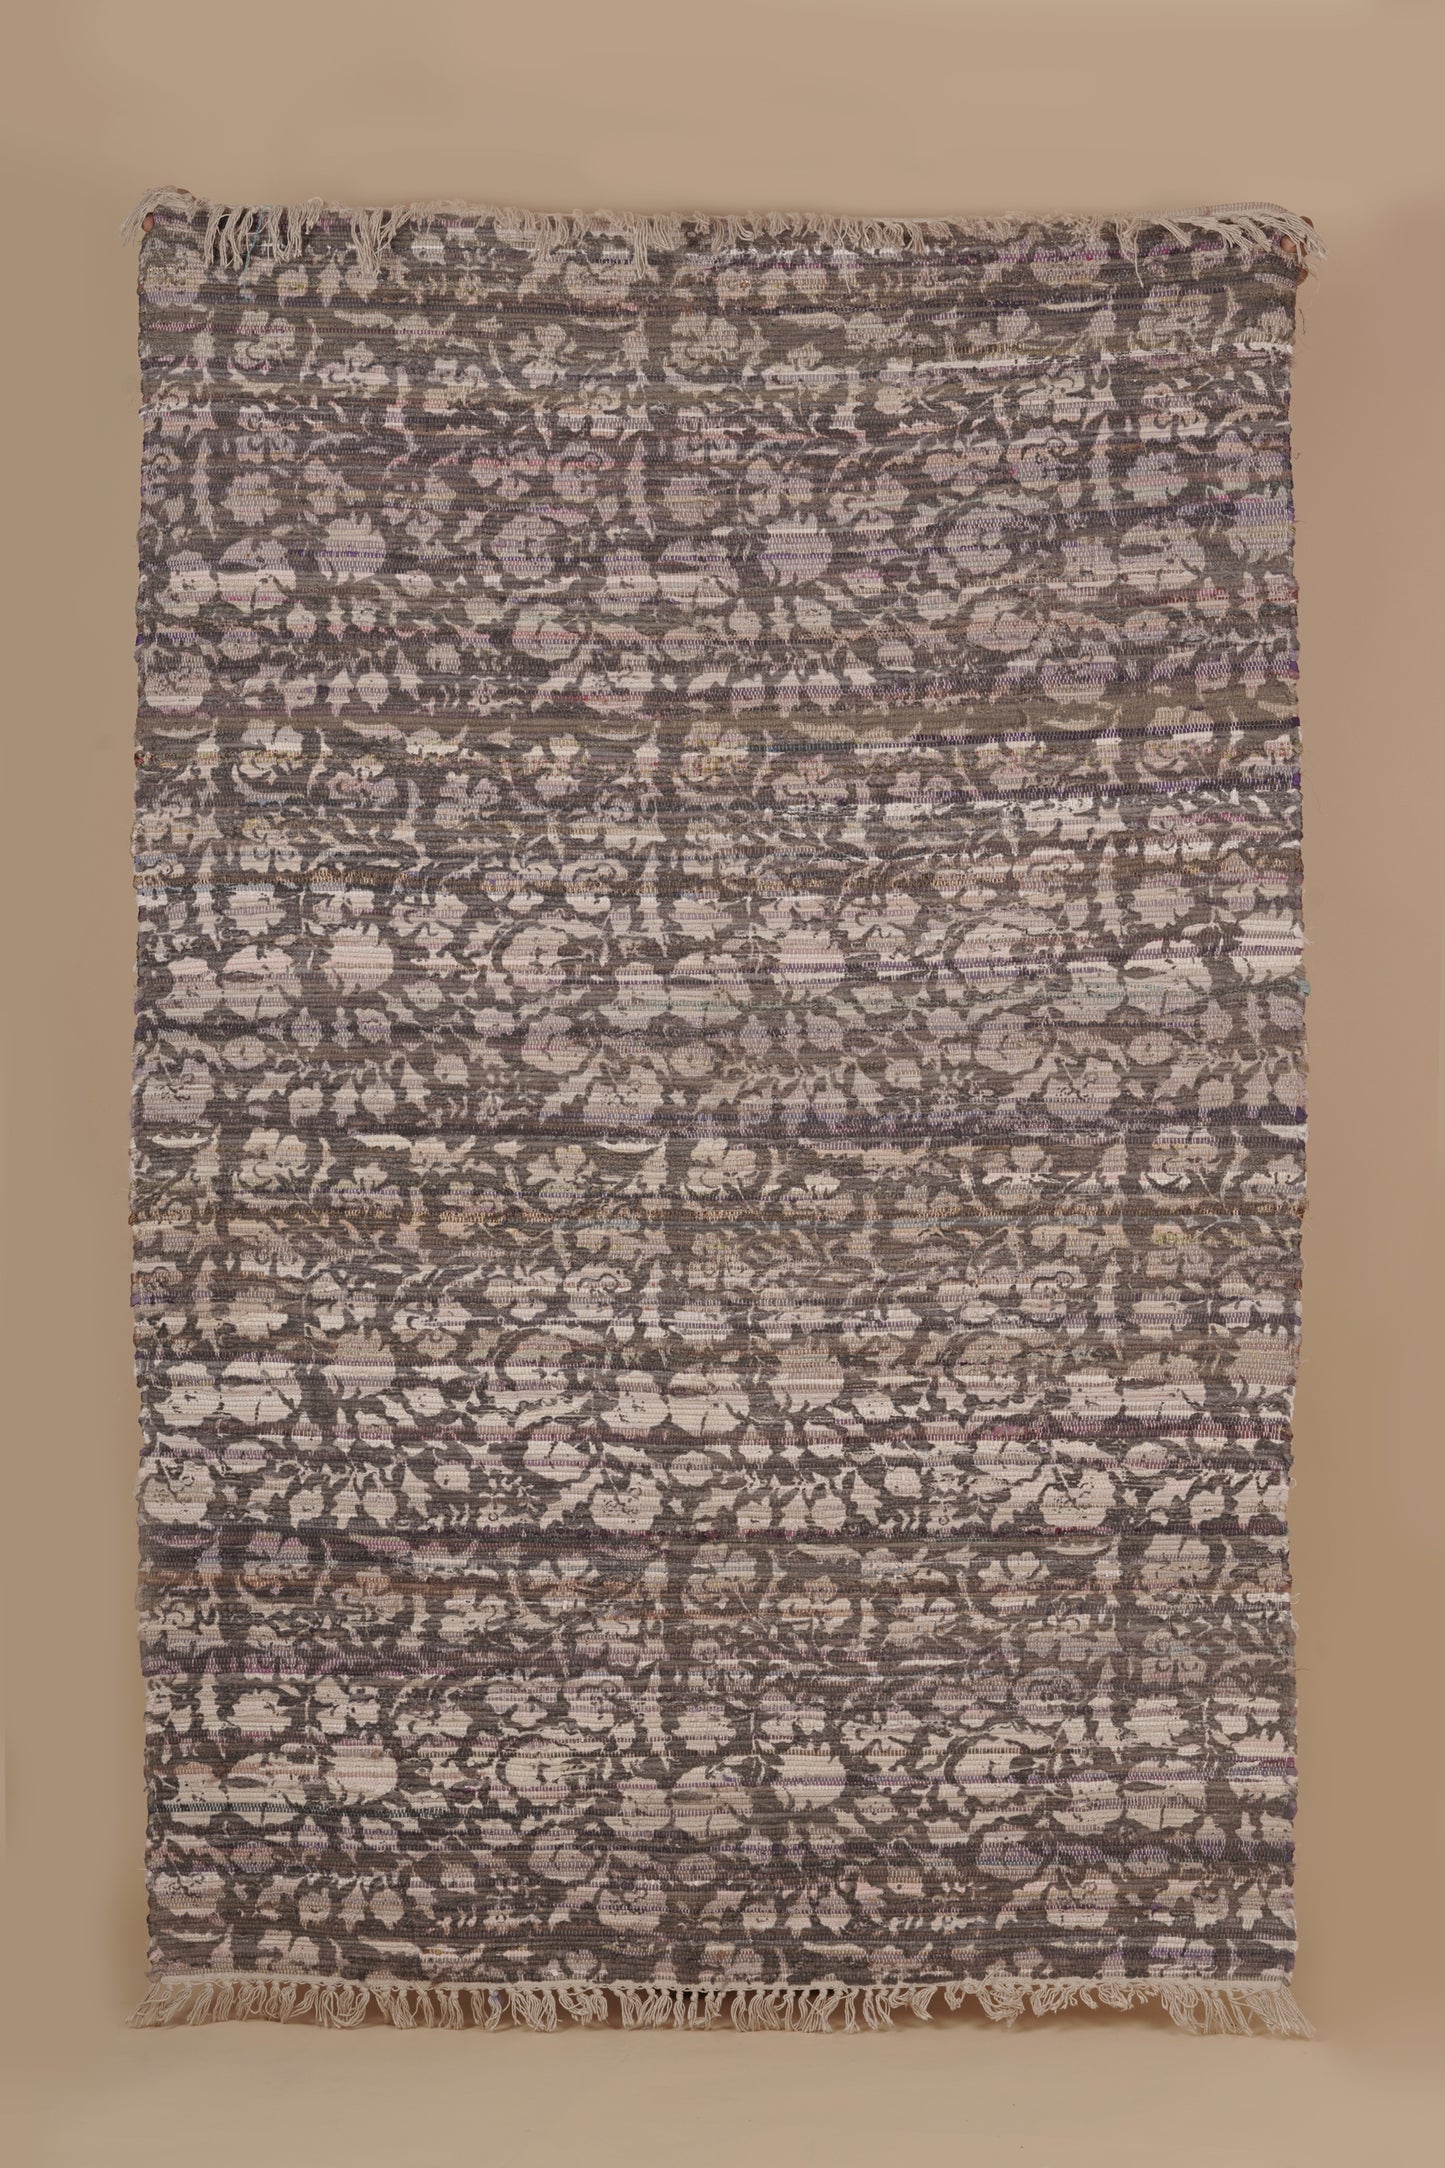 4 x 6 ft Cotton Chindi Woven Rug- Grey and purple - The Teal Thread